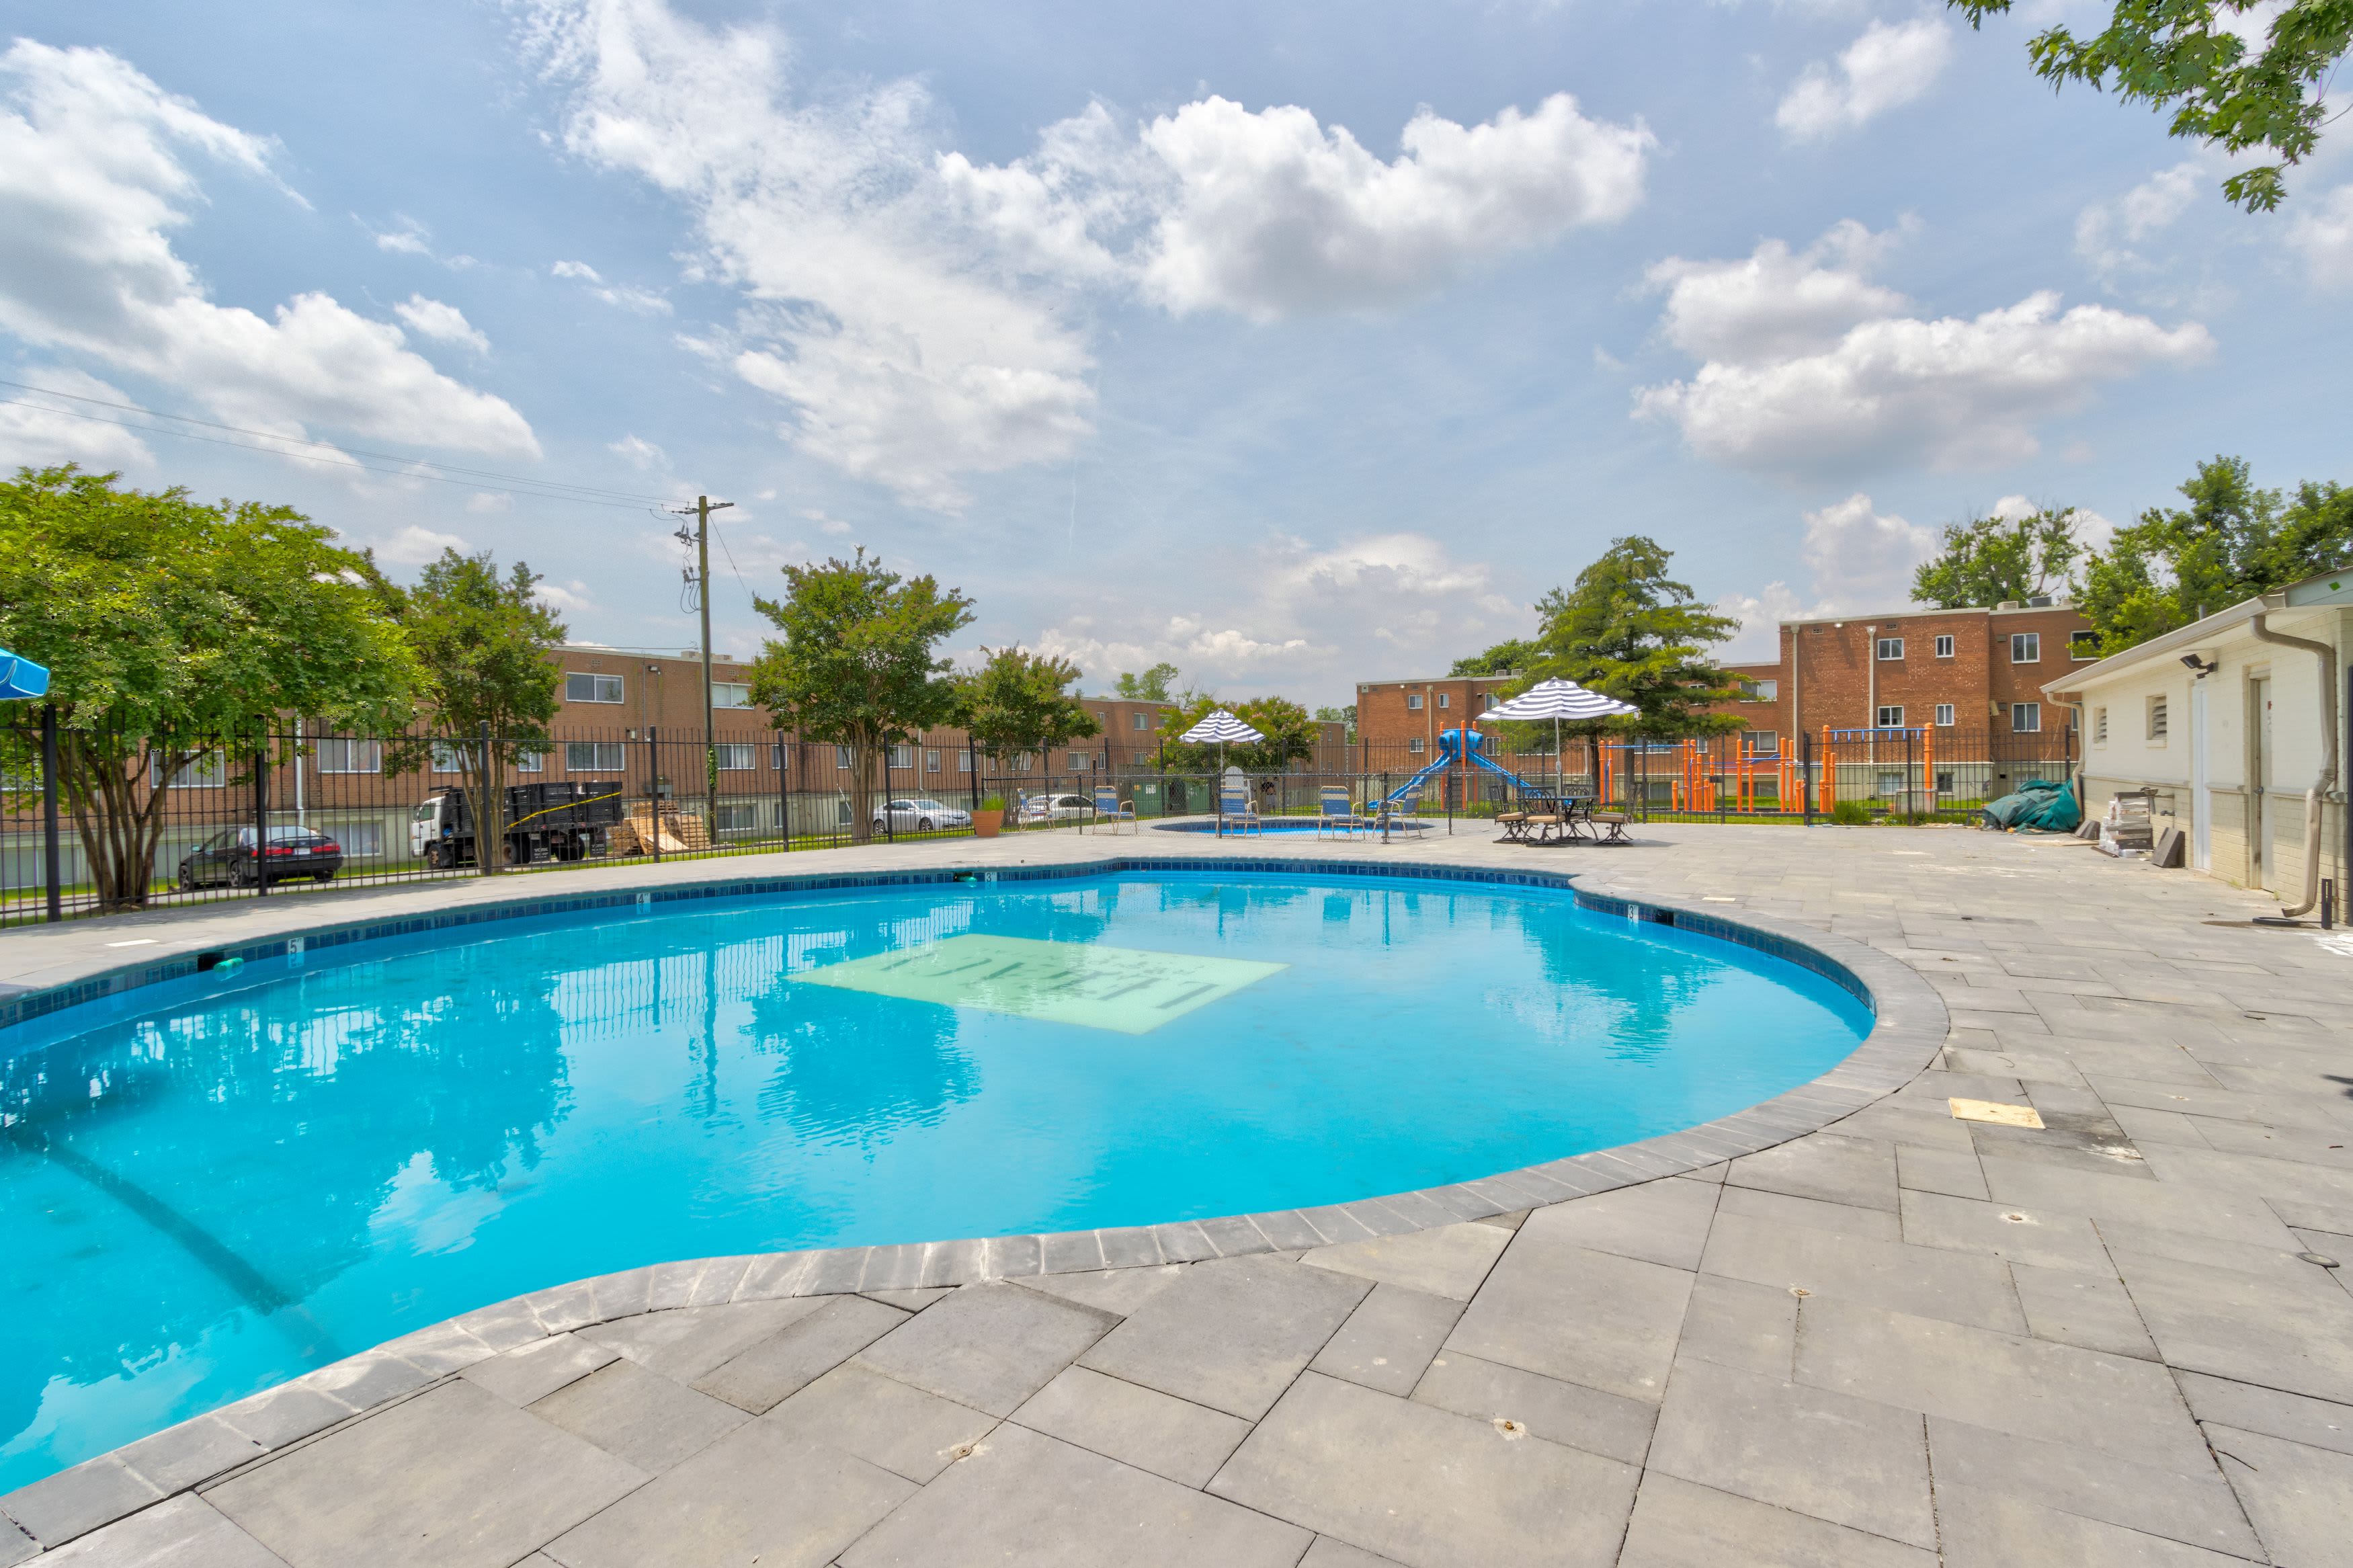 Pool side view at Flats of Forestville Apartment Homes in Forestville, Maryland